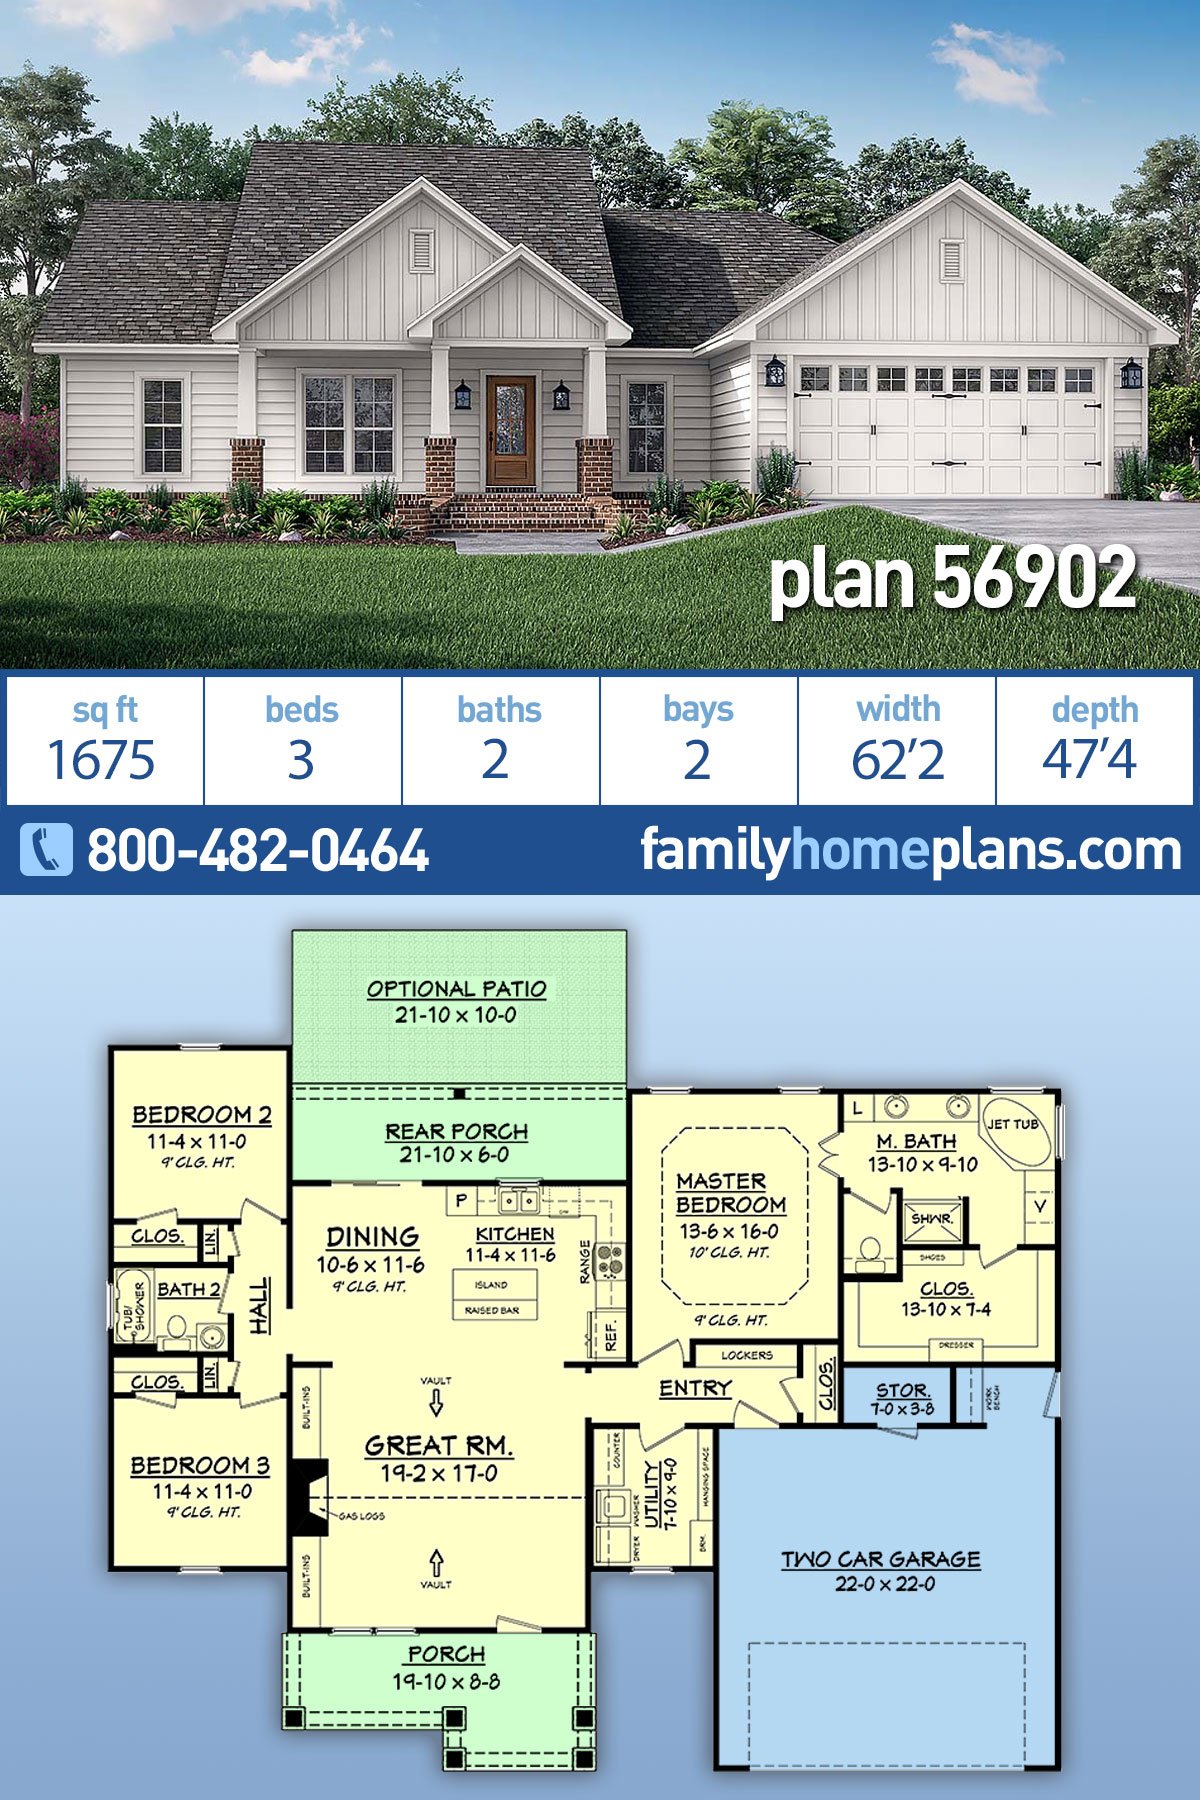 Cottage, Country, Craftsman, Traditional House Plan 56902 with 3 Beds, 2 Baths, 2 Car Garage